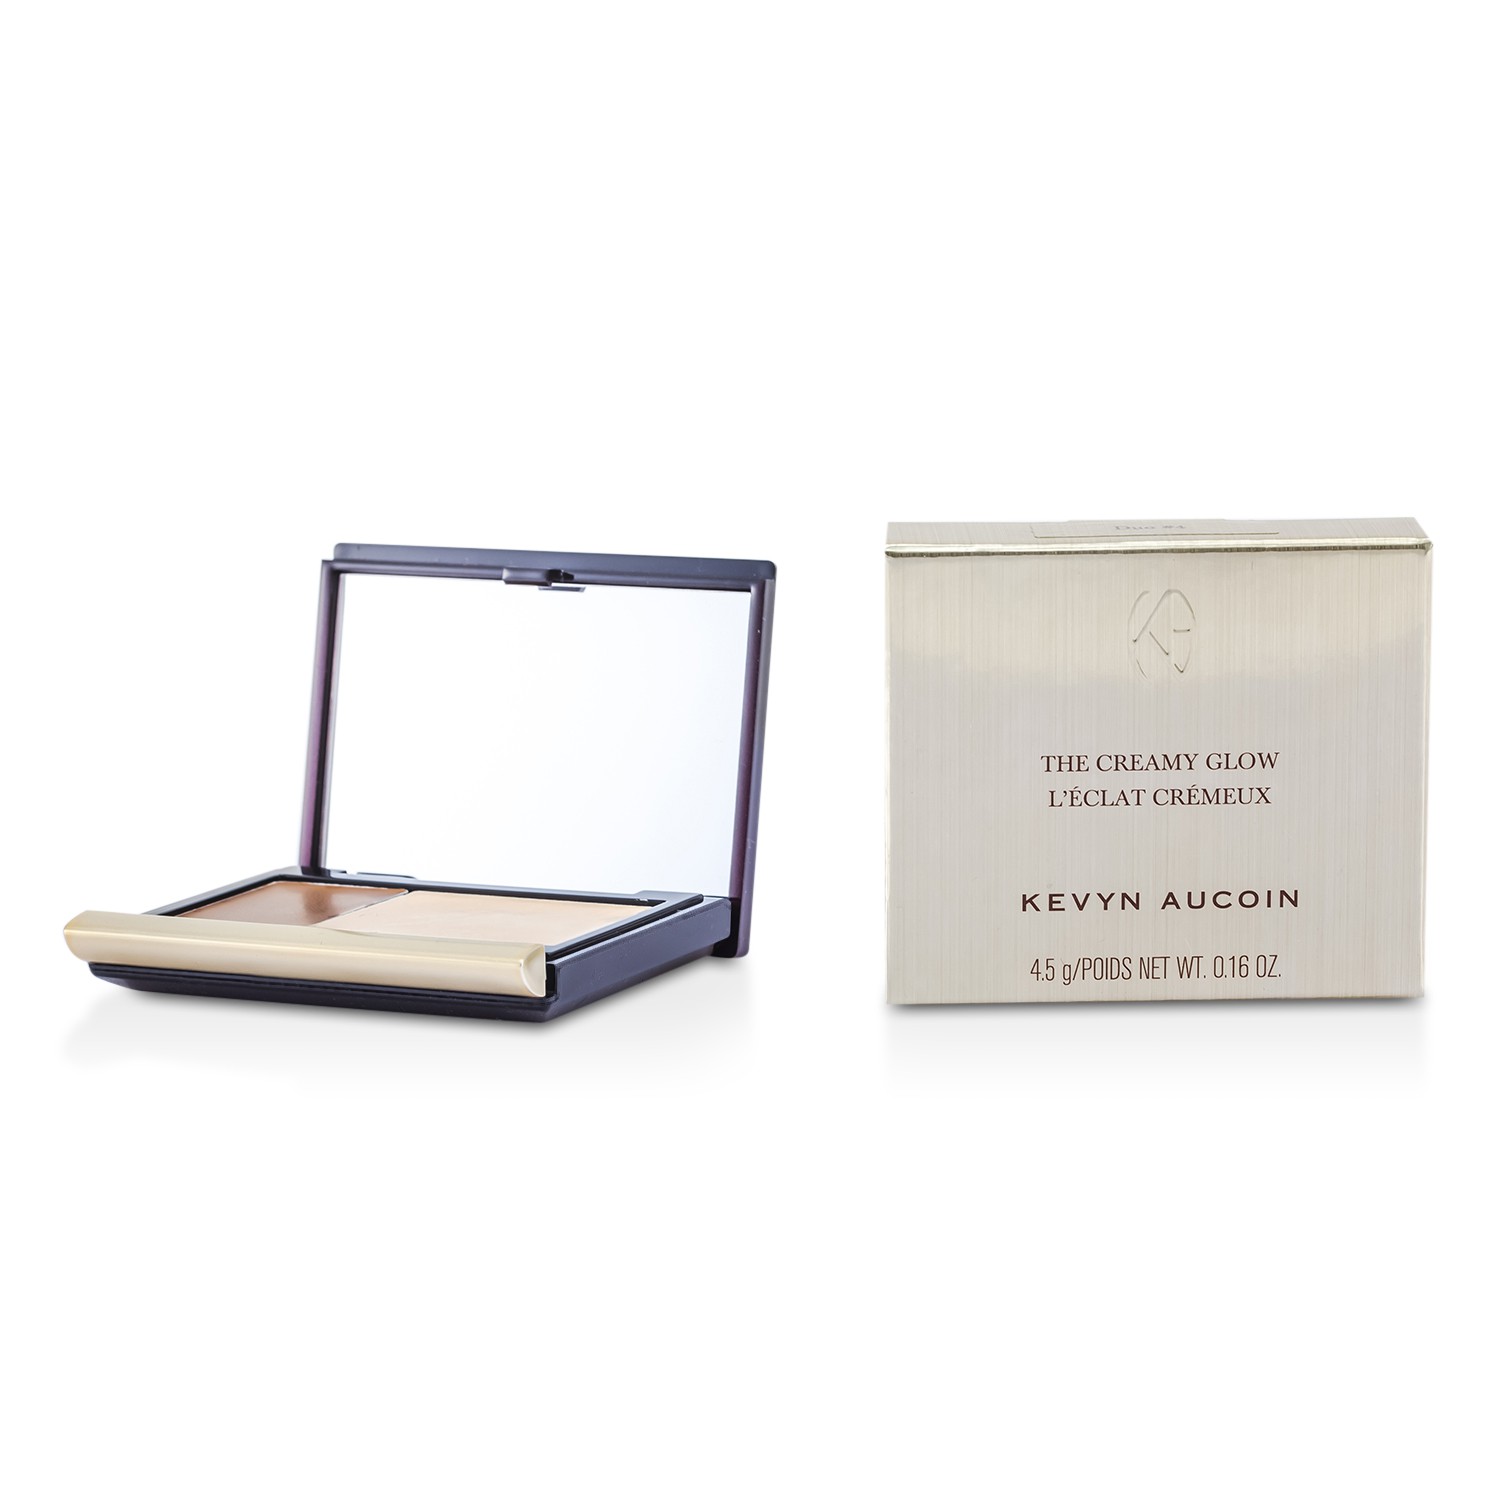 The Creamy Glow Duo - # Duo 4 Sculpting Medium/Candlelight Kevyn Aucoin Image